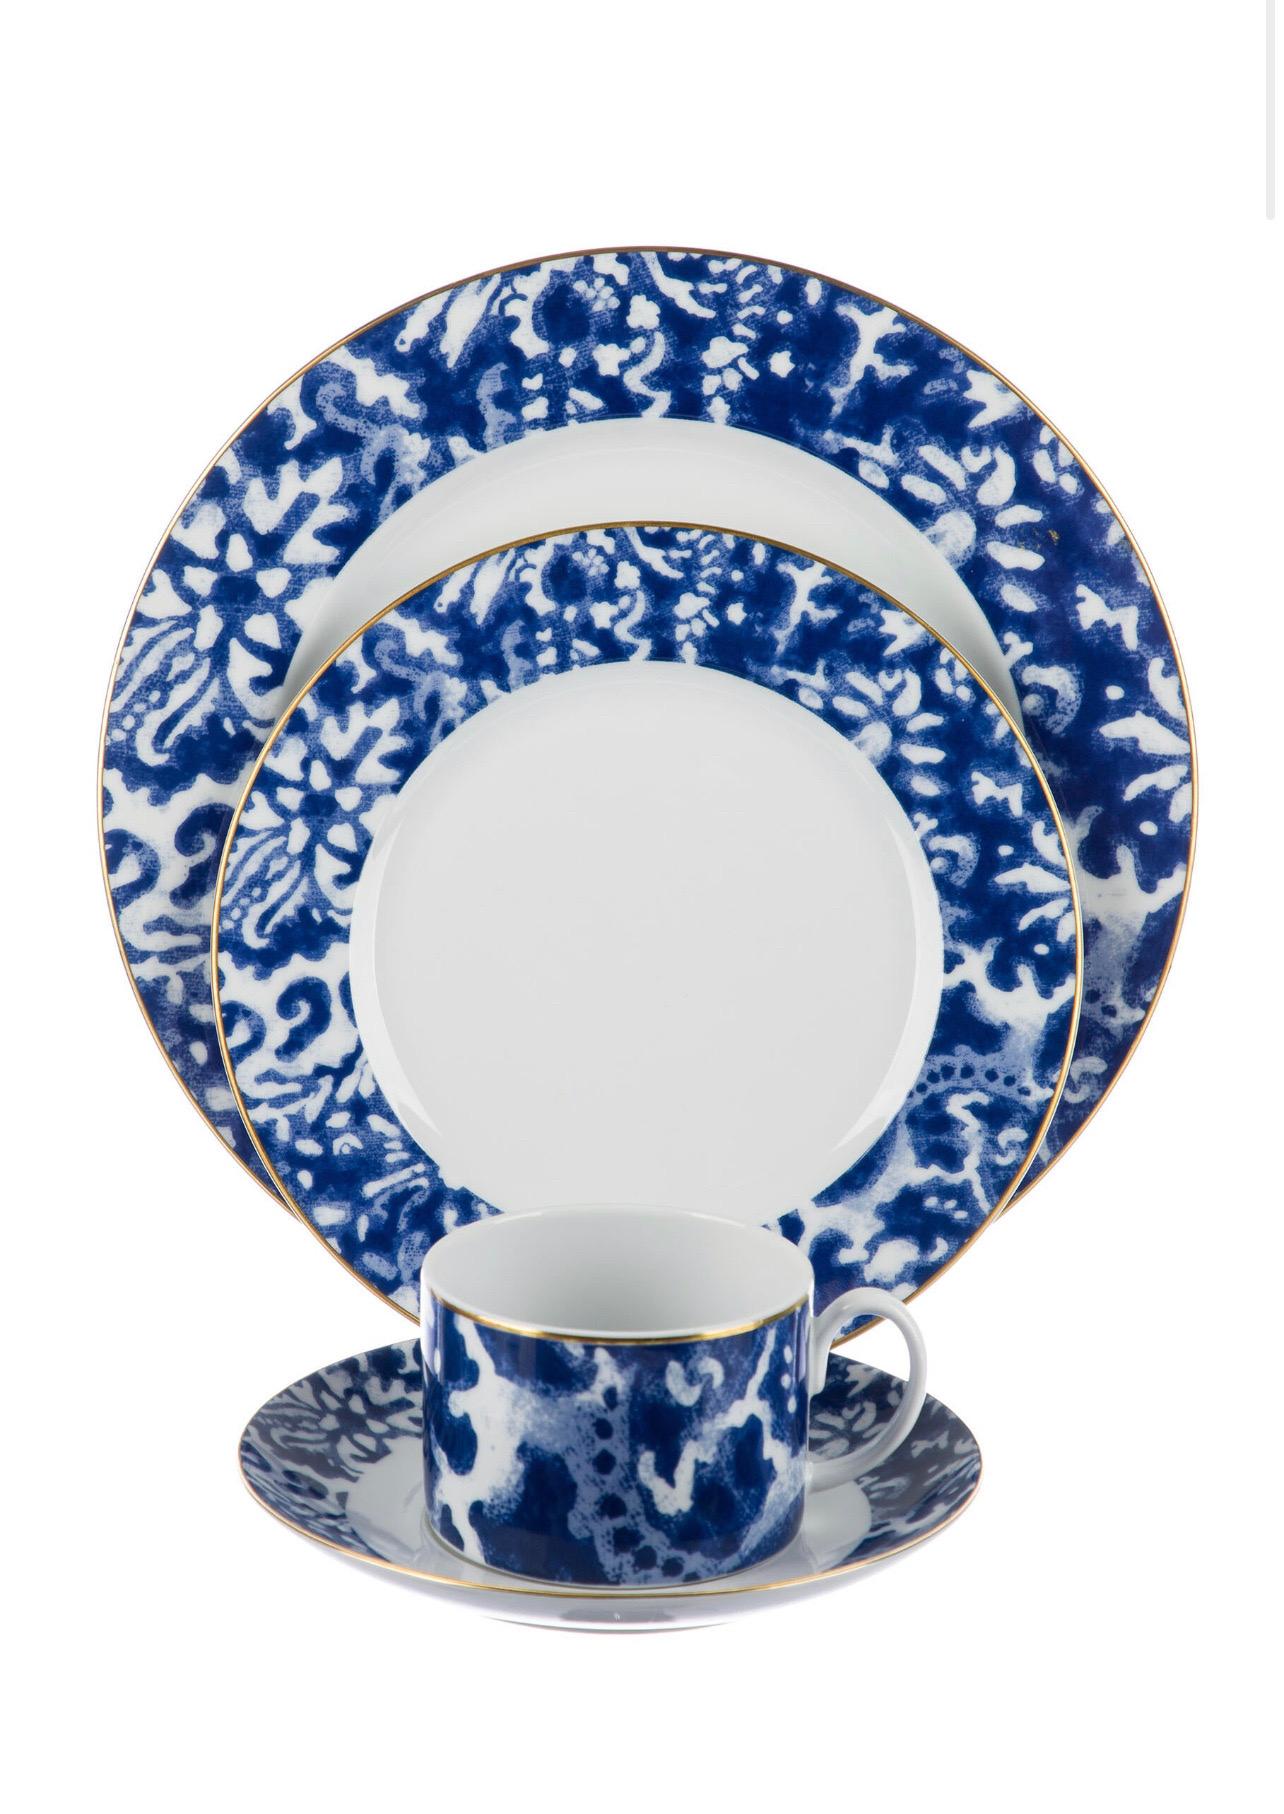 A set of 8 (eight) dinnerware place settings in the Round Hill pattern by Ralph Lauren Home. Signed, circa 2000. A total of 40 pieces.

Features a vibrant tropical pattern in blue and white with gold edge.

Originally made for Ralph Lauren in